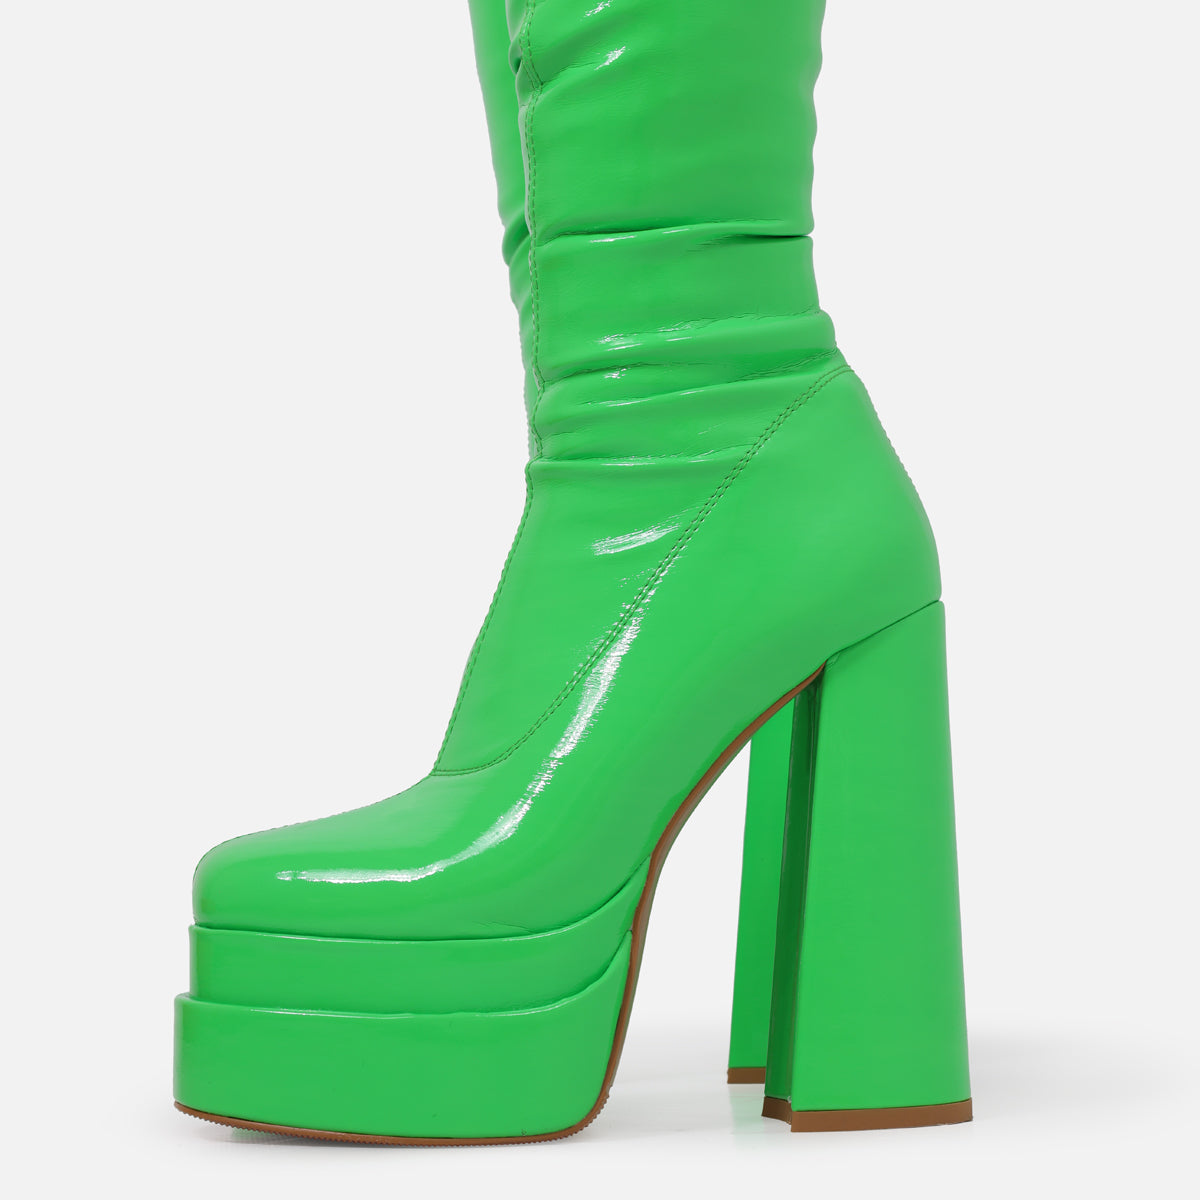 The Redemption Green Stretch Thigh High Boots - Long Boots - KOI Footwear - Green - Close-Up Detail